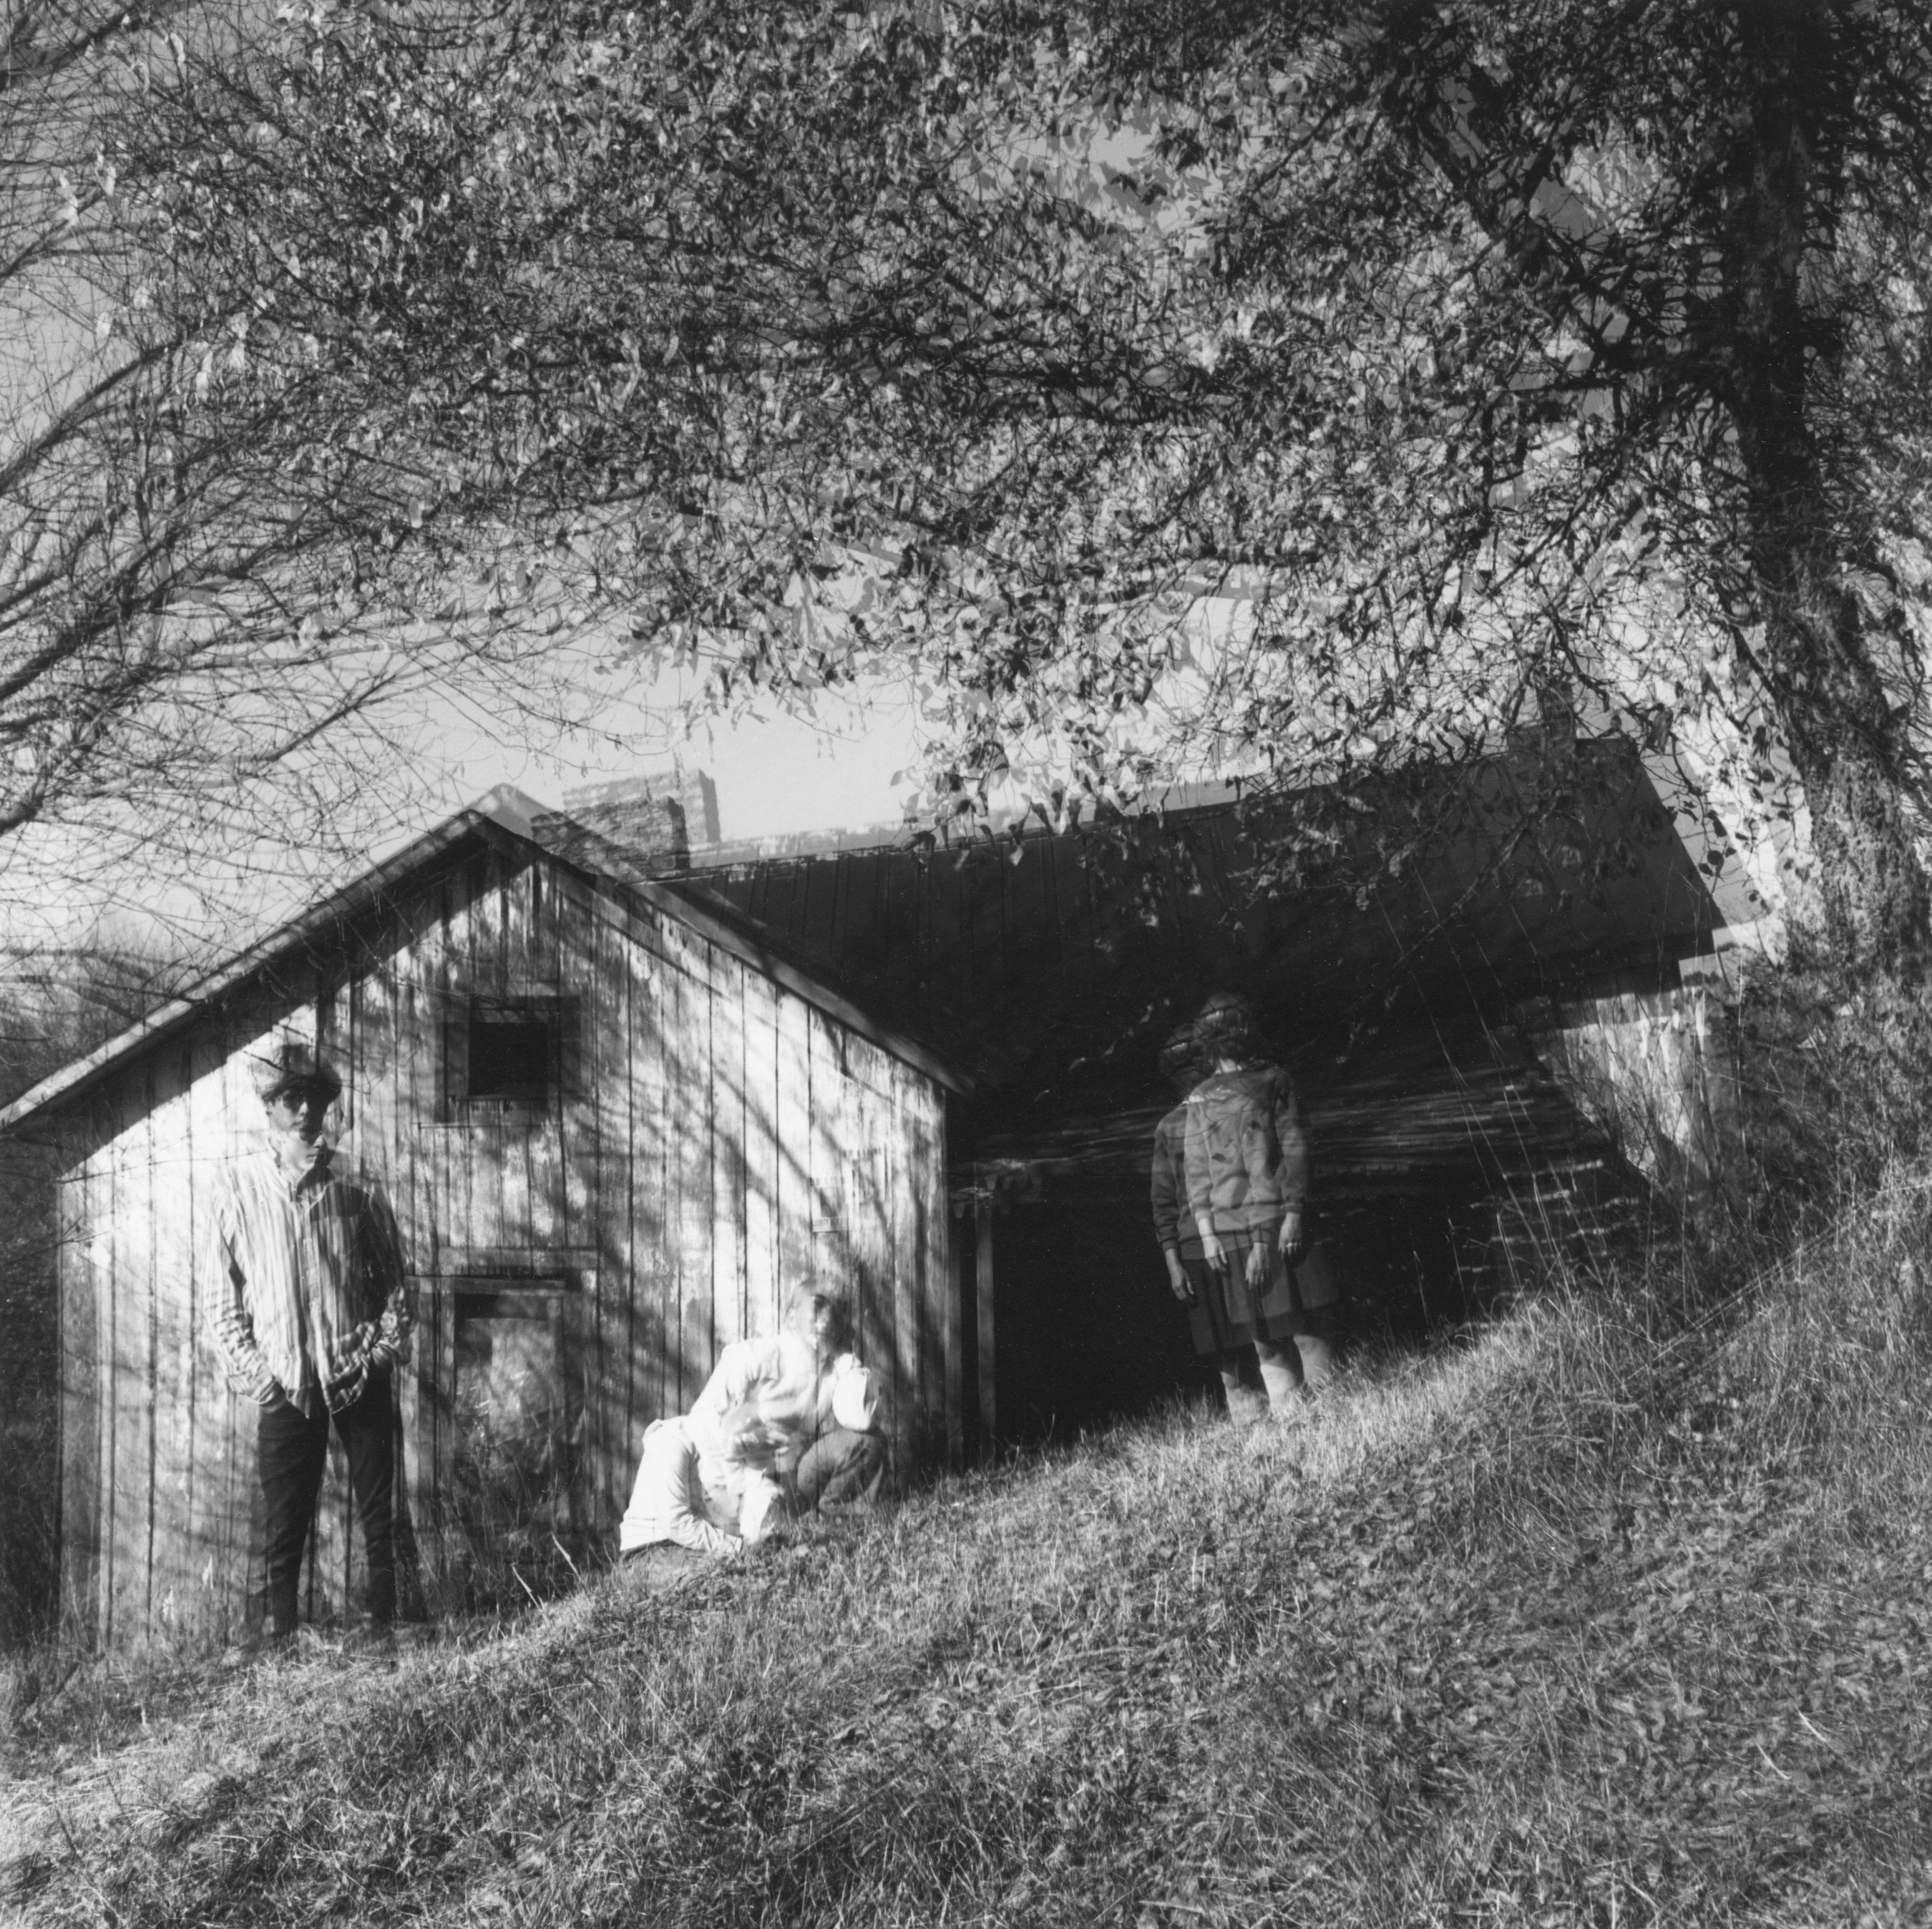 Black and white photograph of three figures wearing masks standing outside an abandoned home with a blurred motion effect